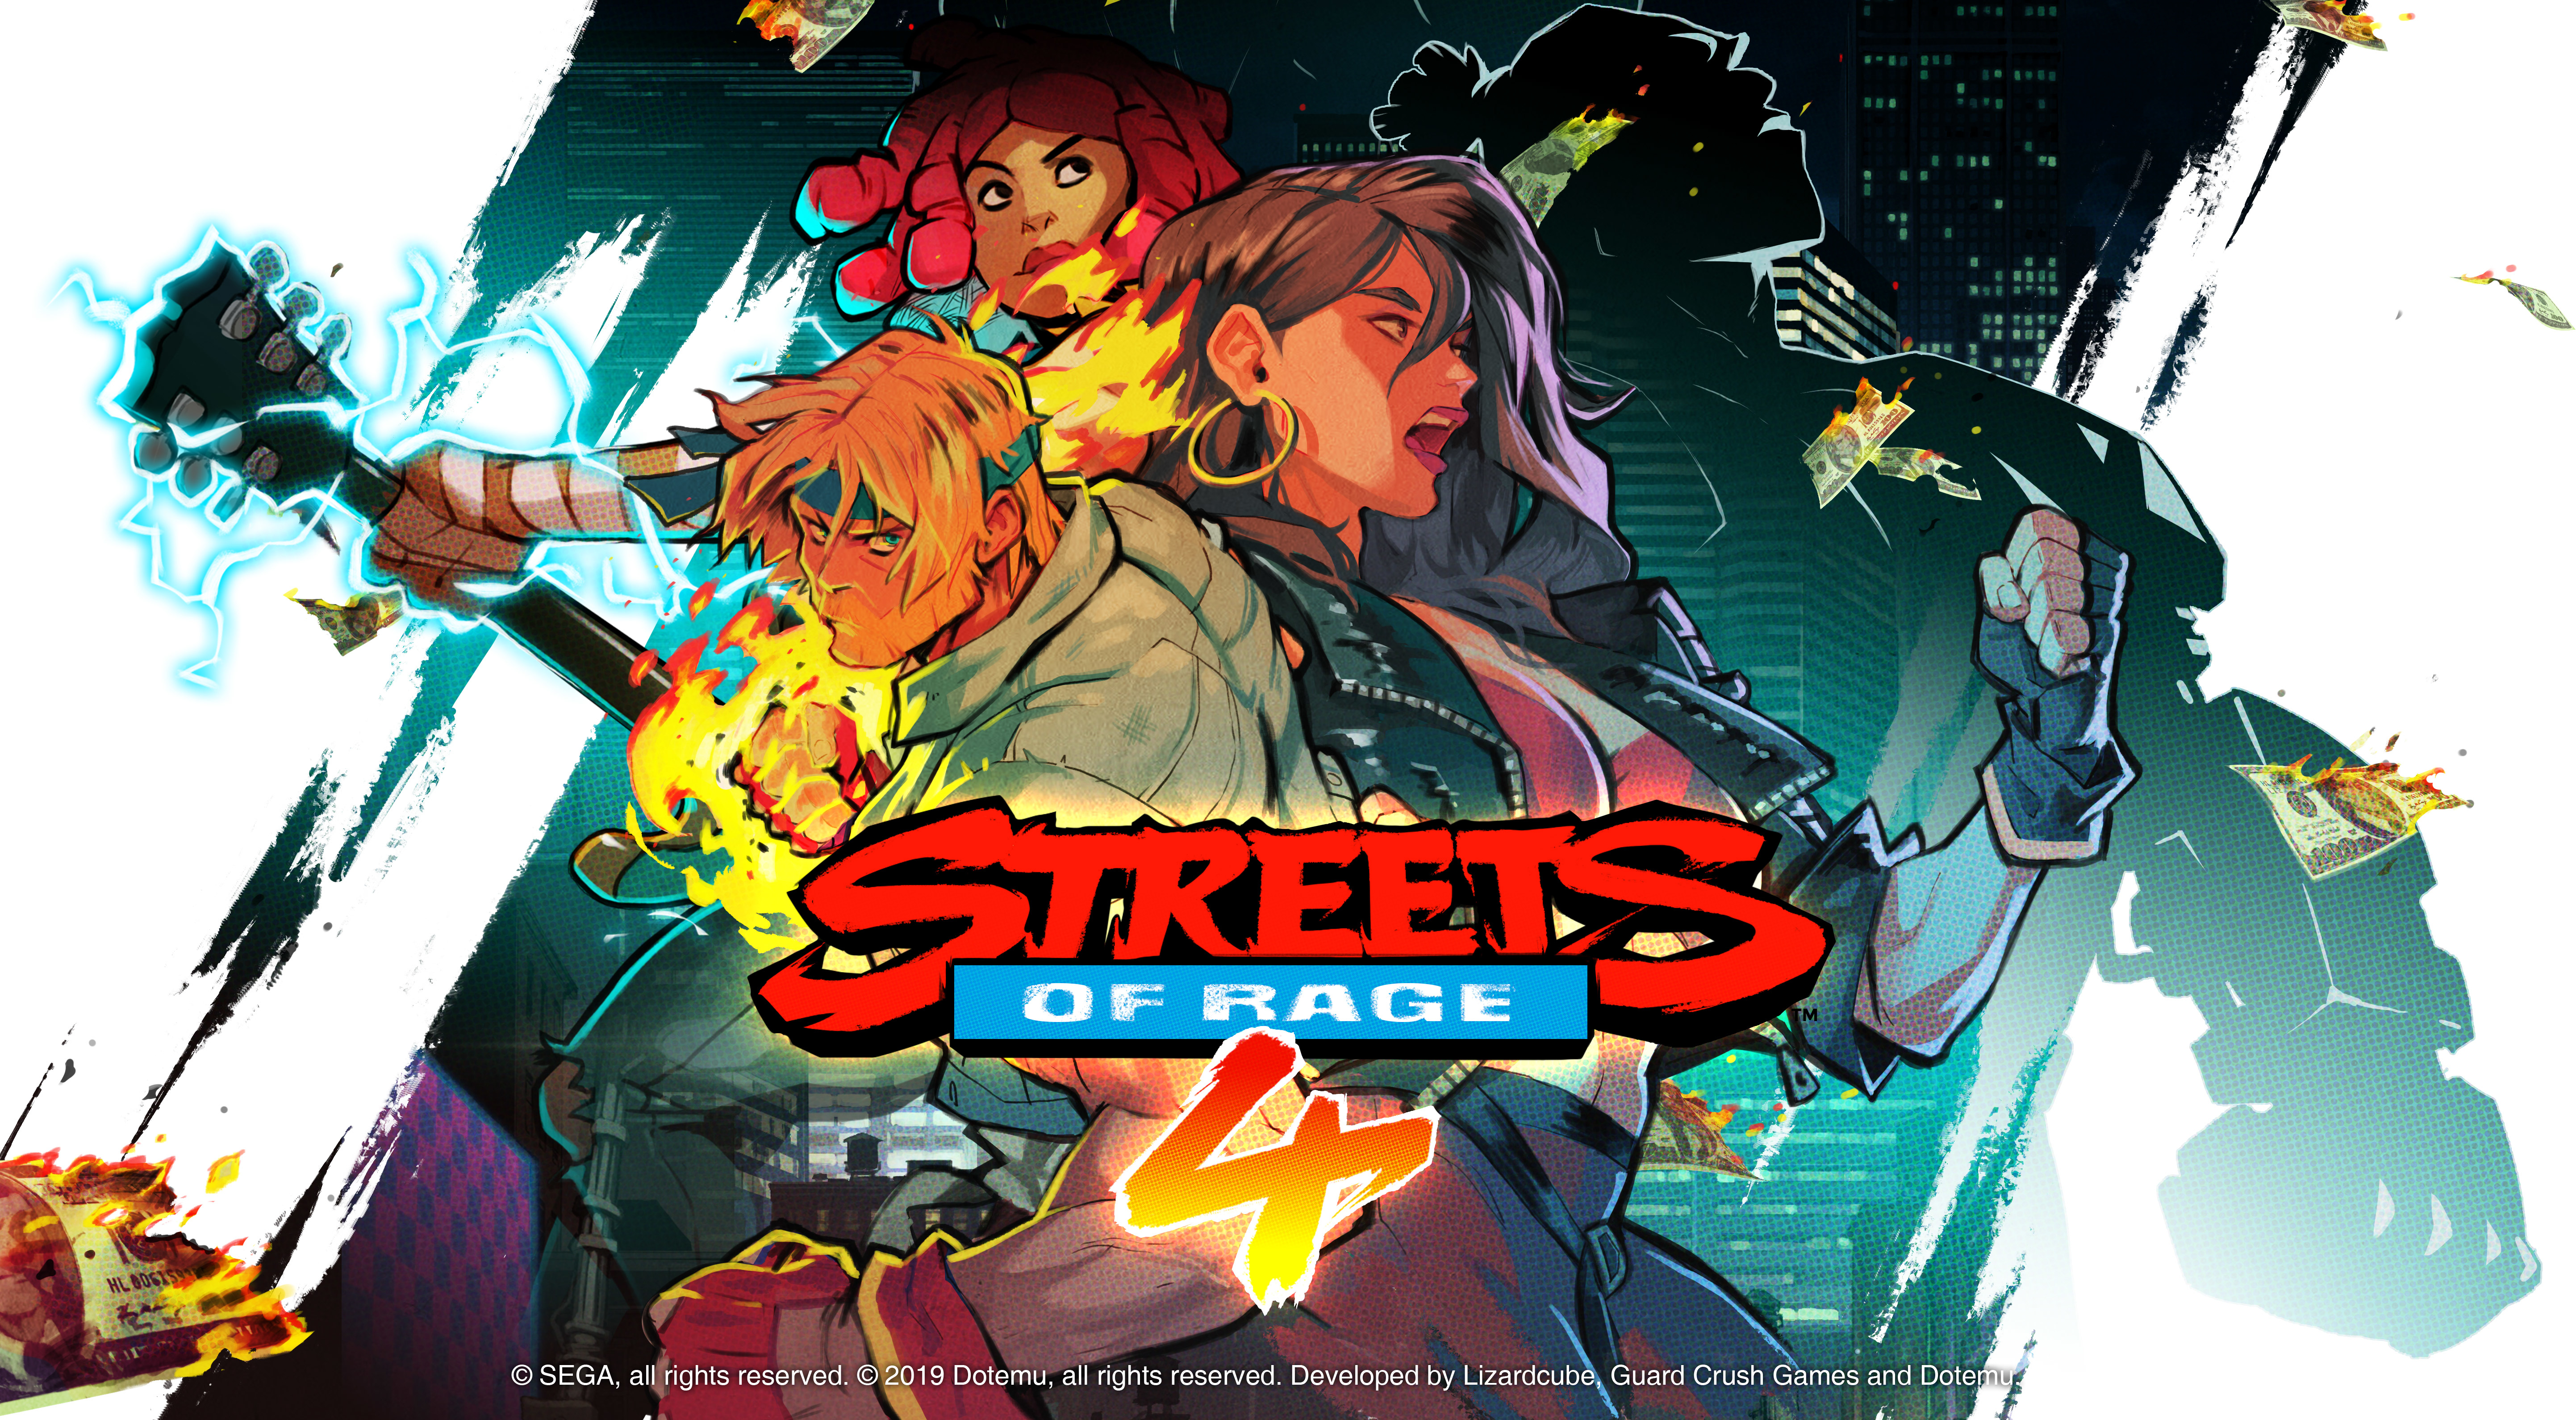 Streets Of Rage Streets Of Rage 4 Video Game Art Video Games Artwork Digital Art BARE KNUCKLE Axel S 5769x3179